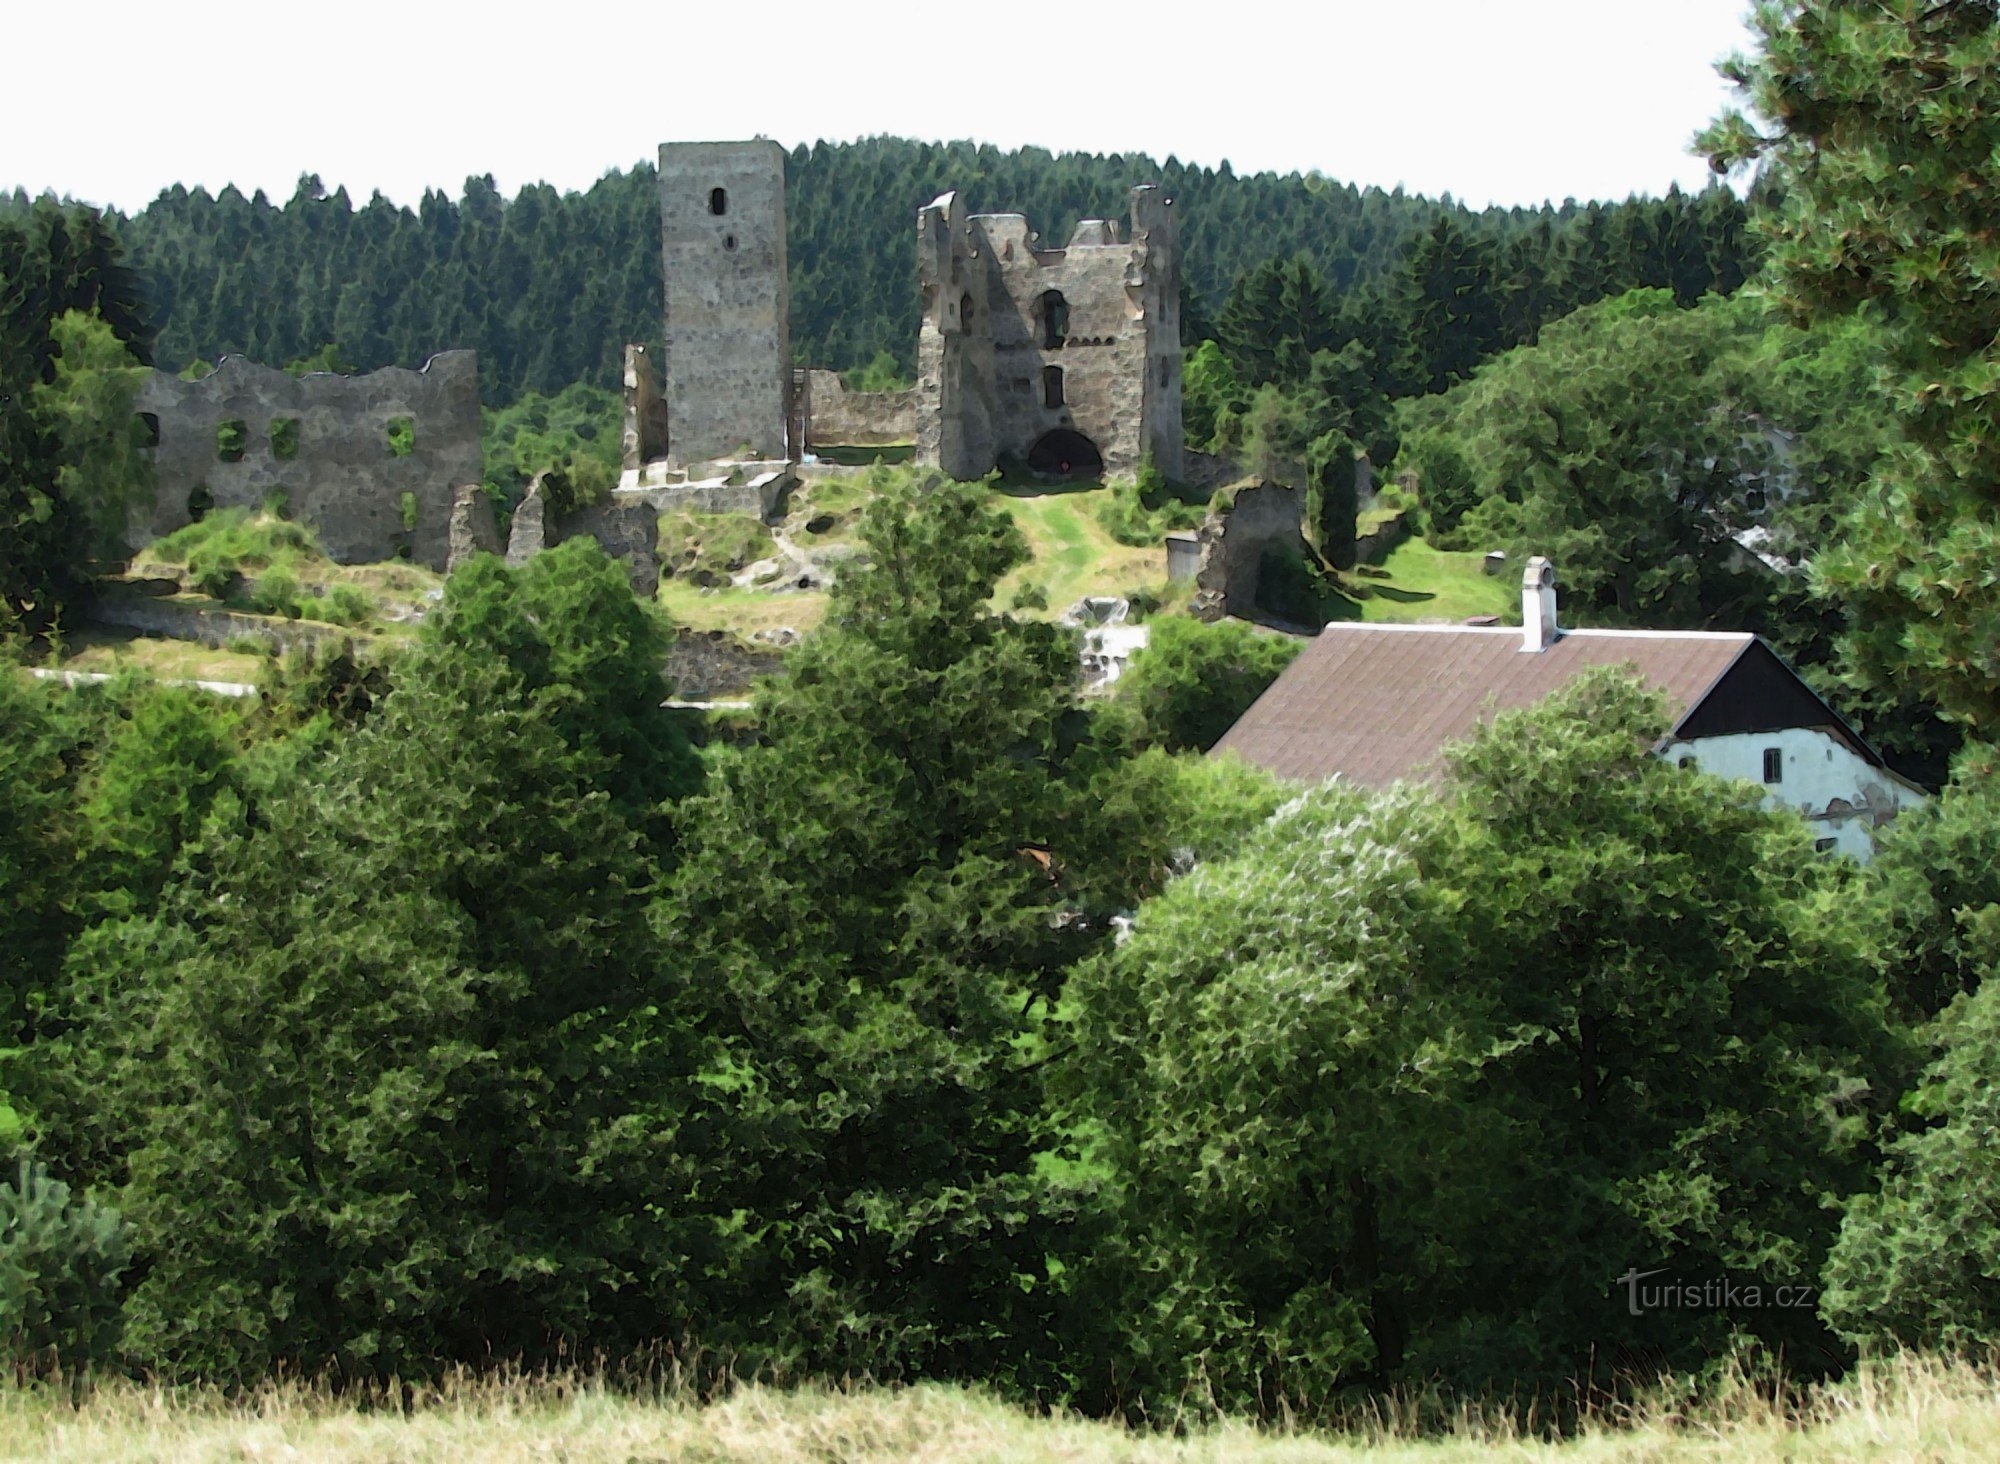 To the ruins of the Rokštejna castle and to the Brtnice valley